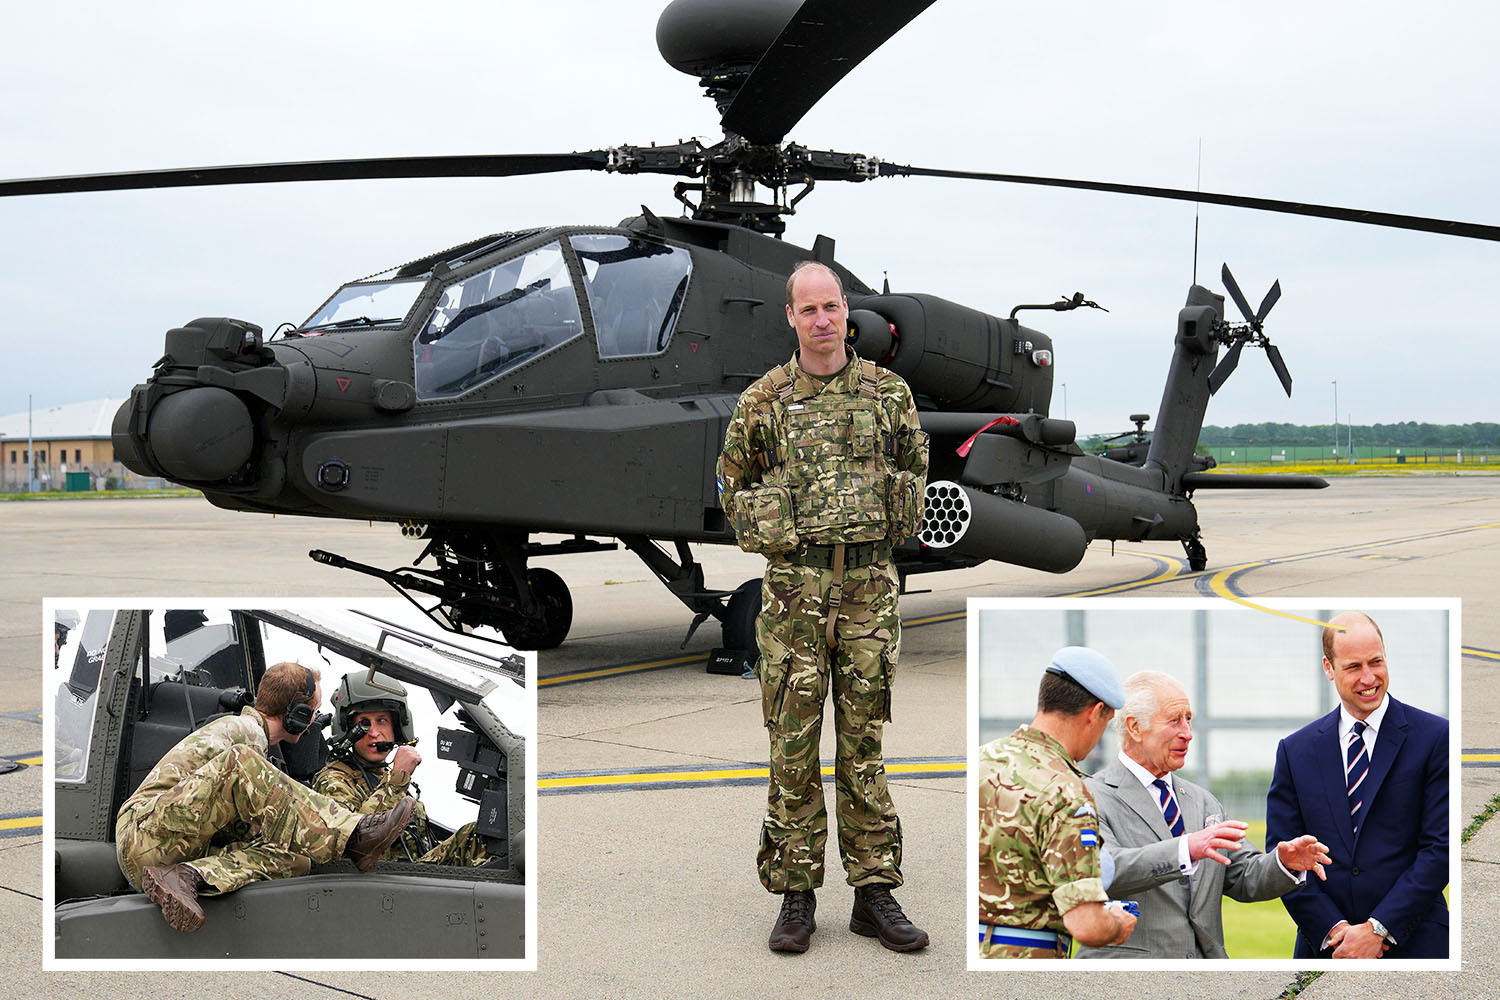 Moment Wills takes off in Apache after being made unit leader in snub for Harry